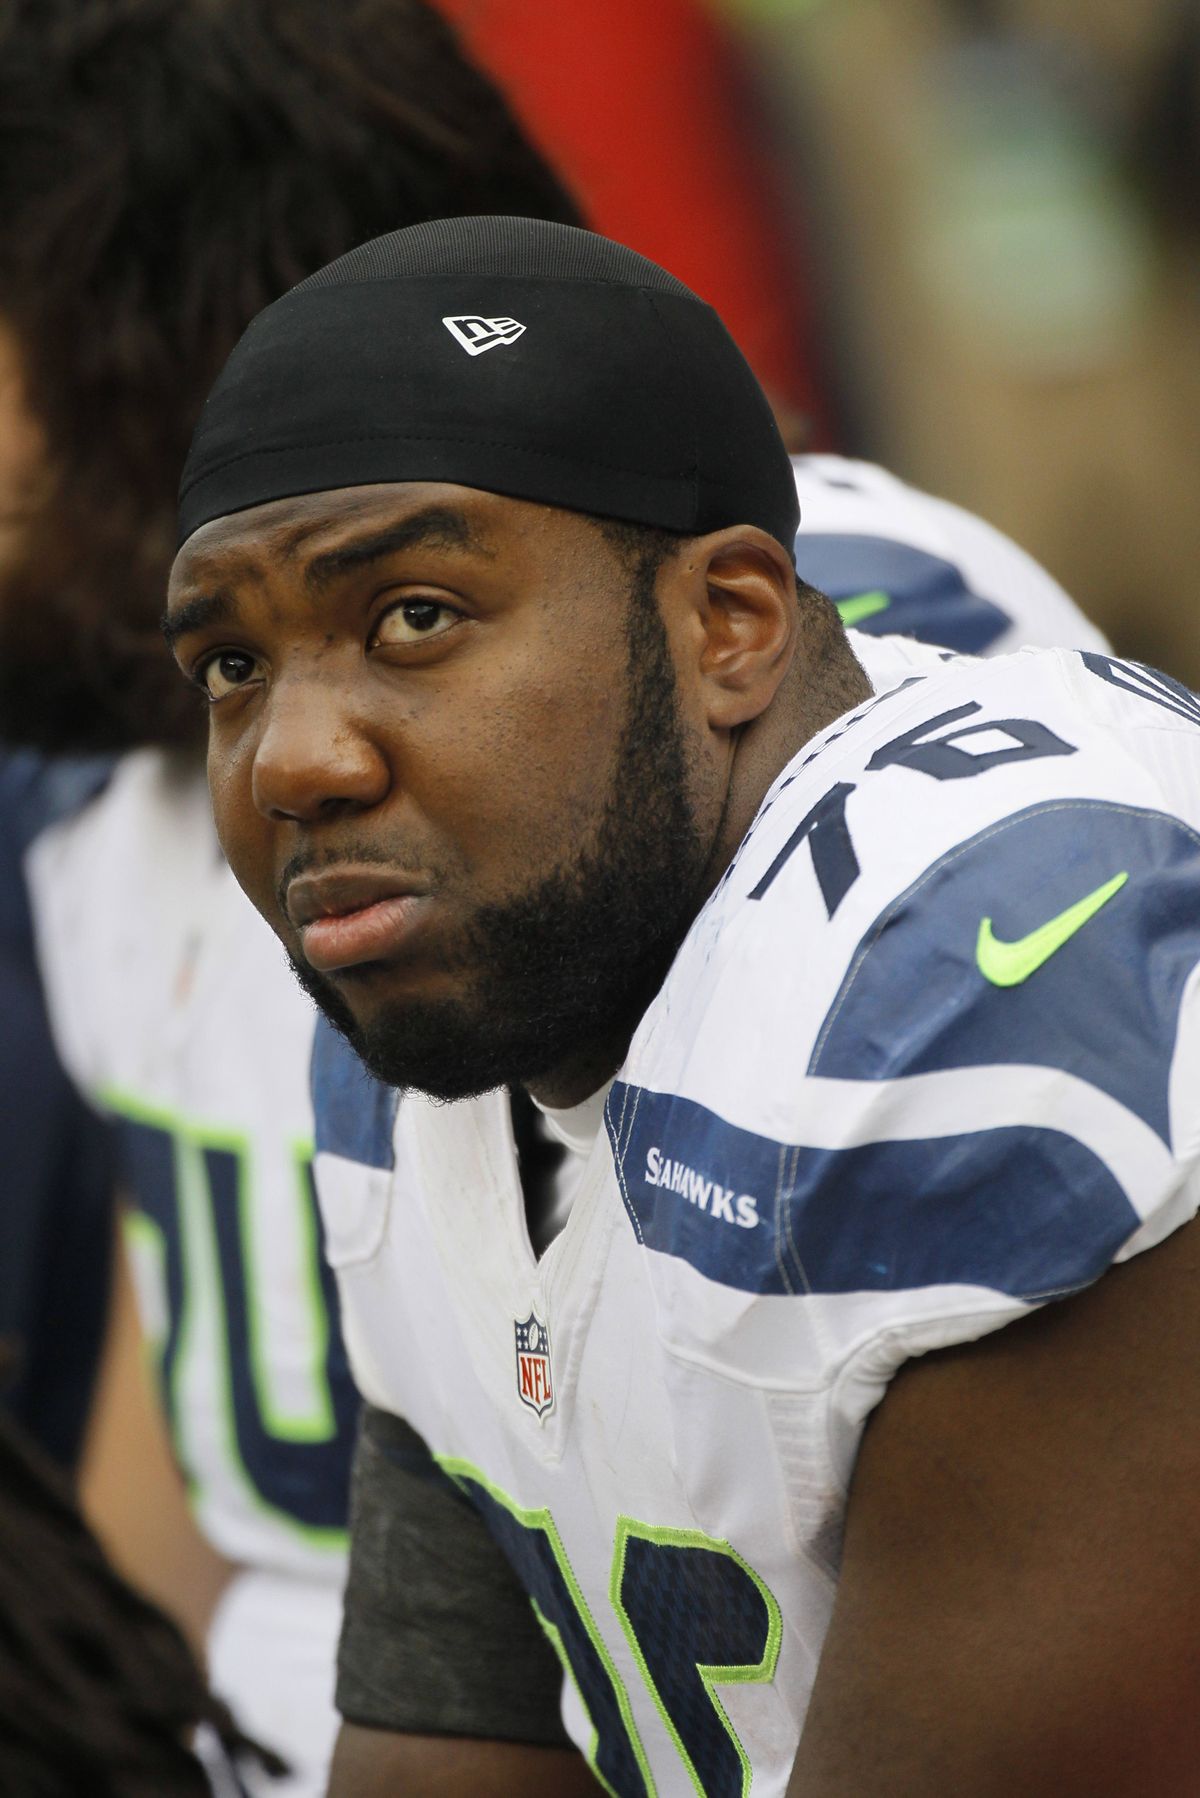 Russell Okung has allowed only one sack this season. (Associated Press)